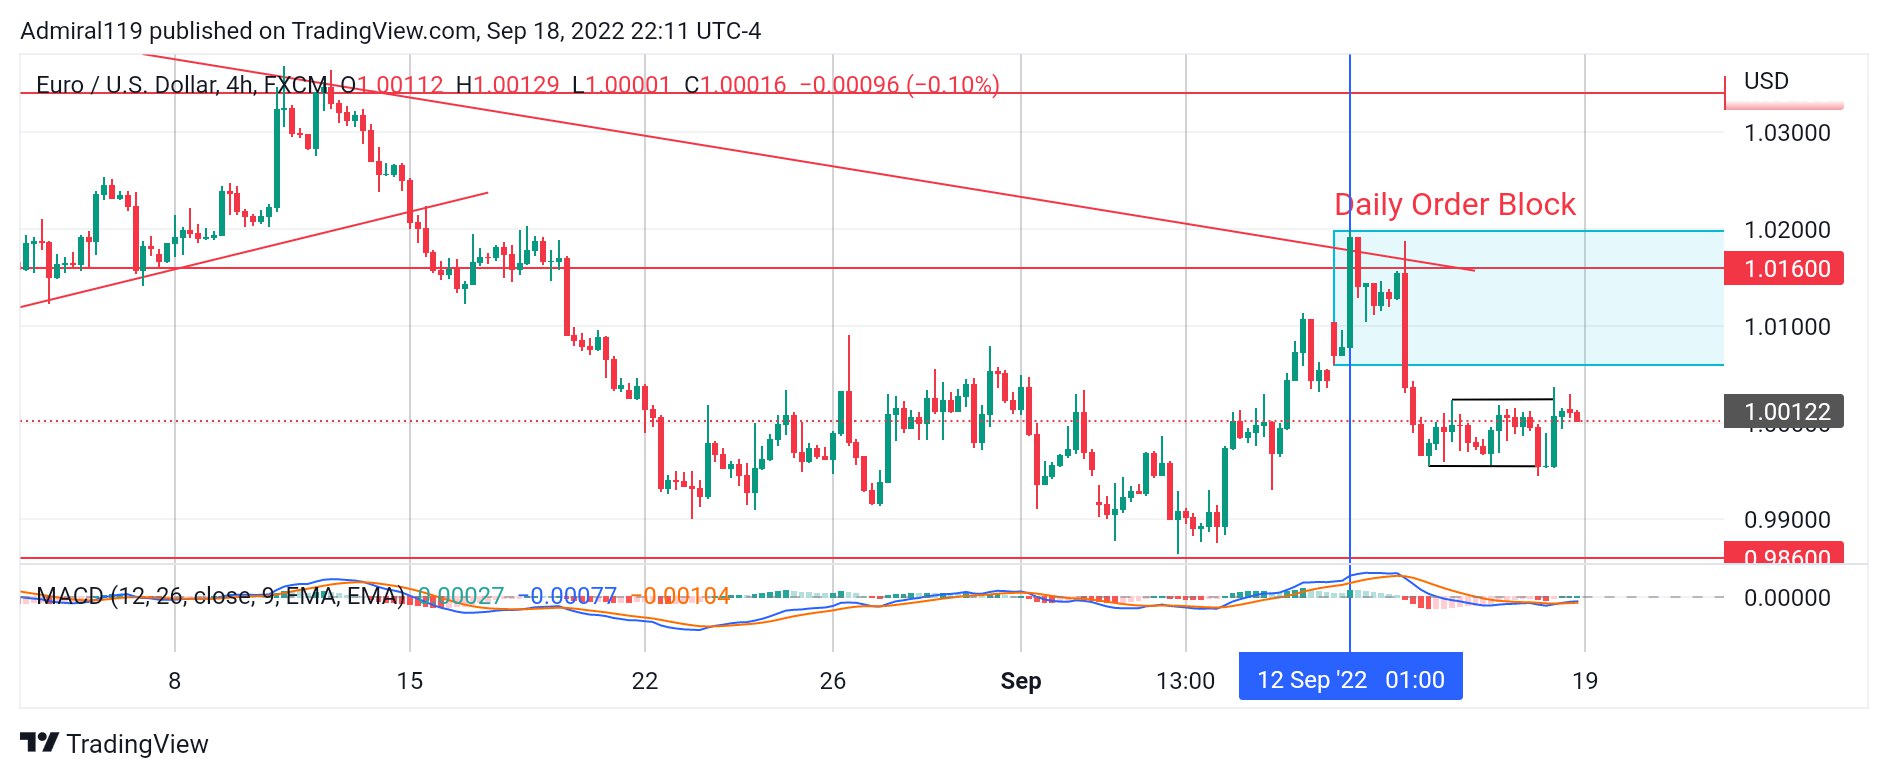 EURUSD buyers exit the market after hitting the supply zone